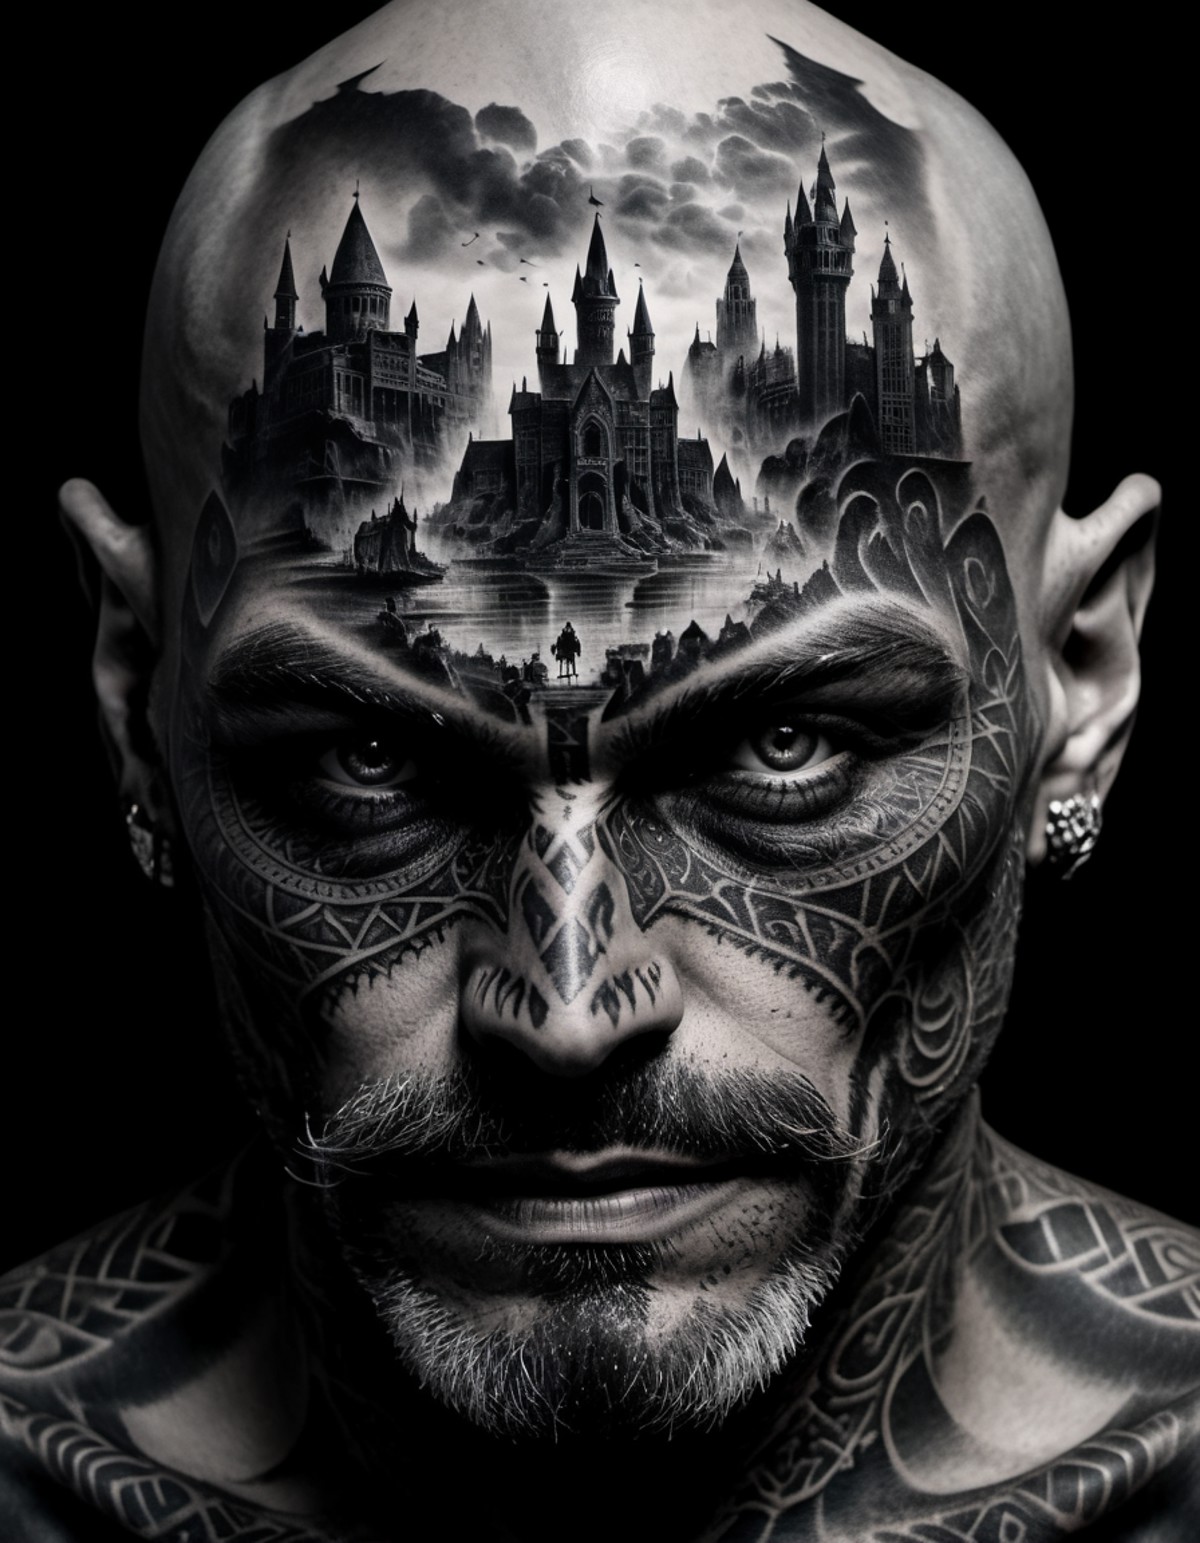 double exposure, black and white pencil sketch extreme side closeup of a wizards face with black tattoos, mountains,  blac...